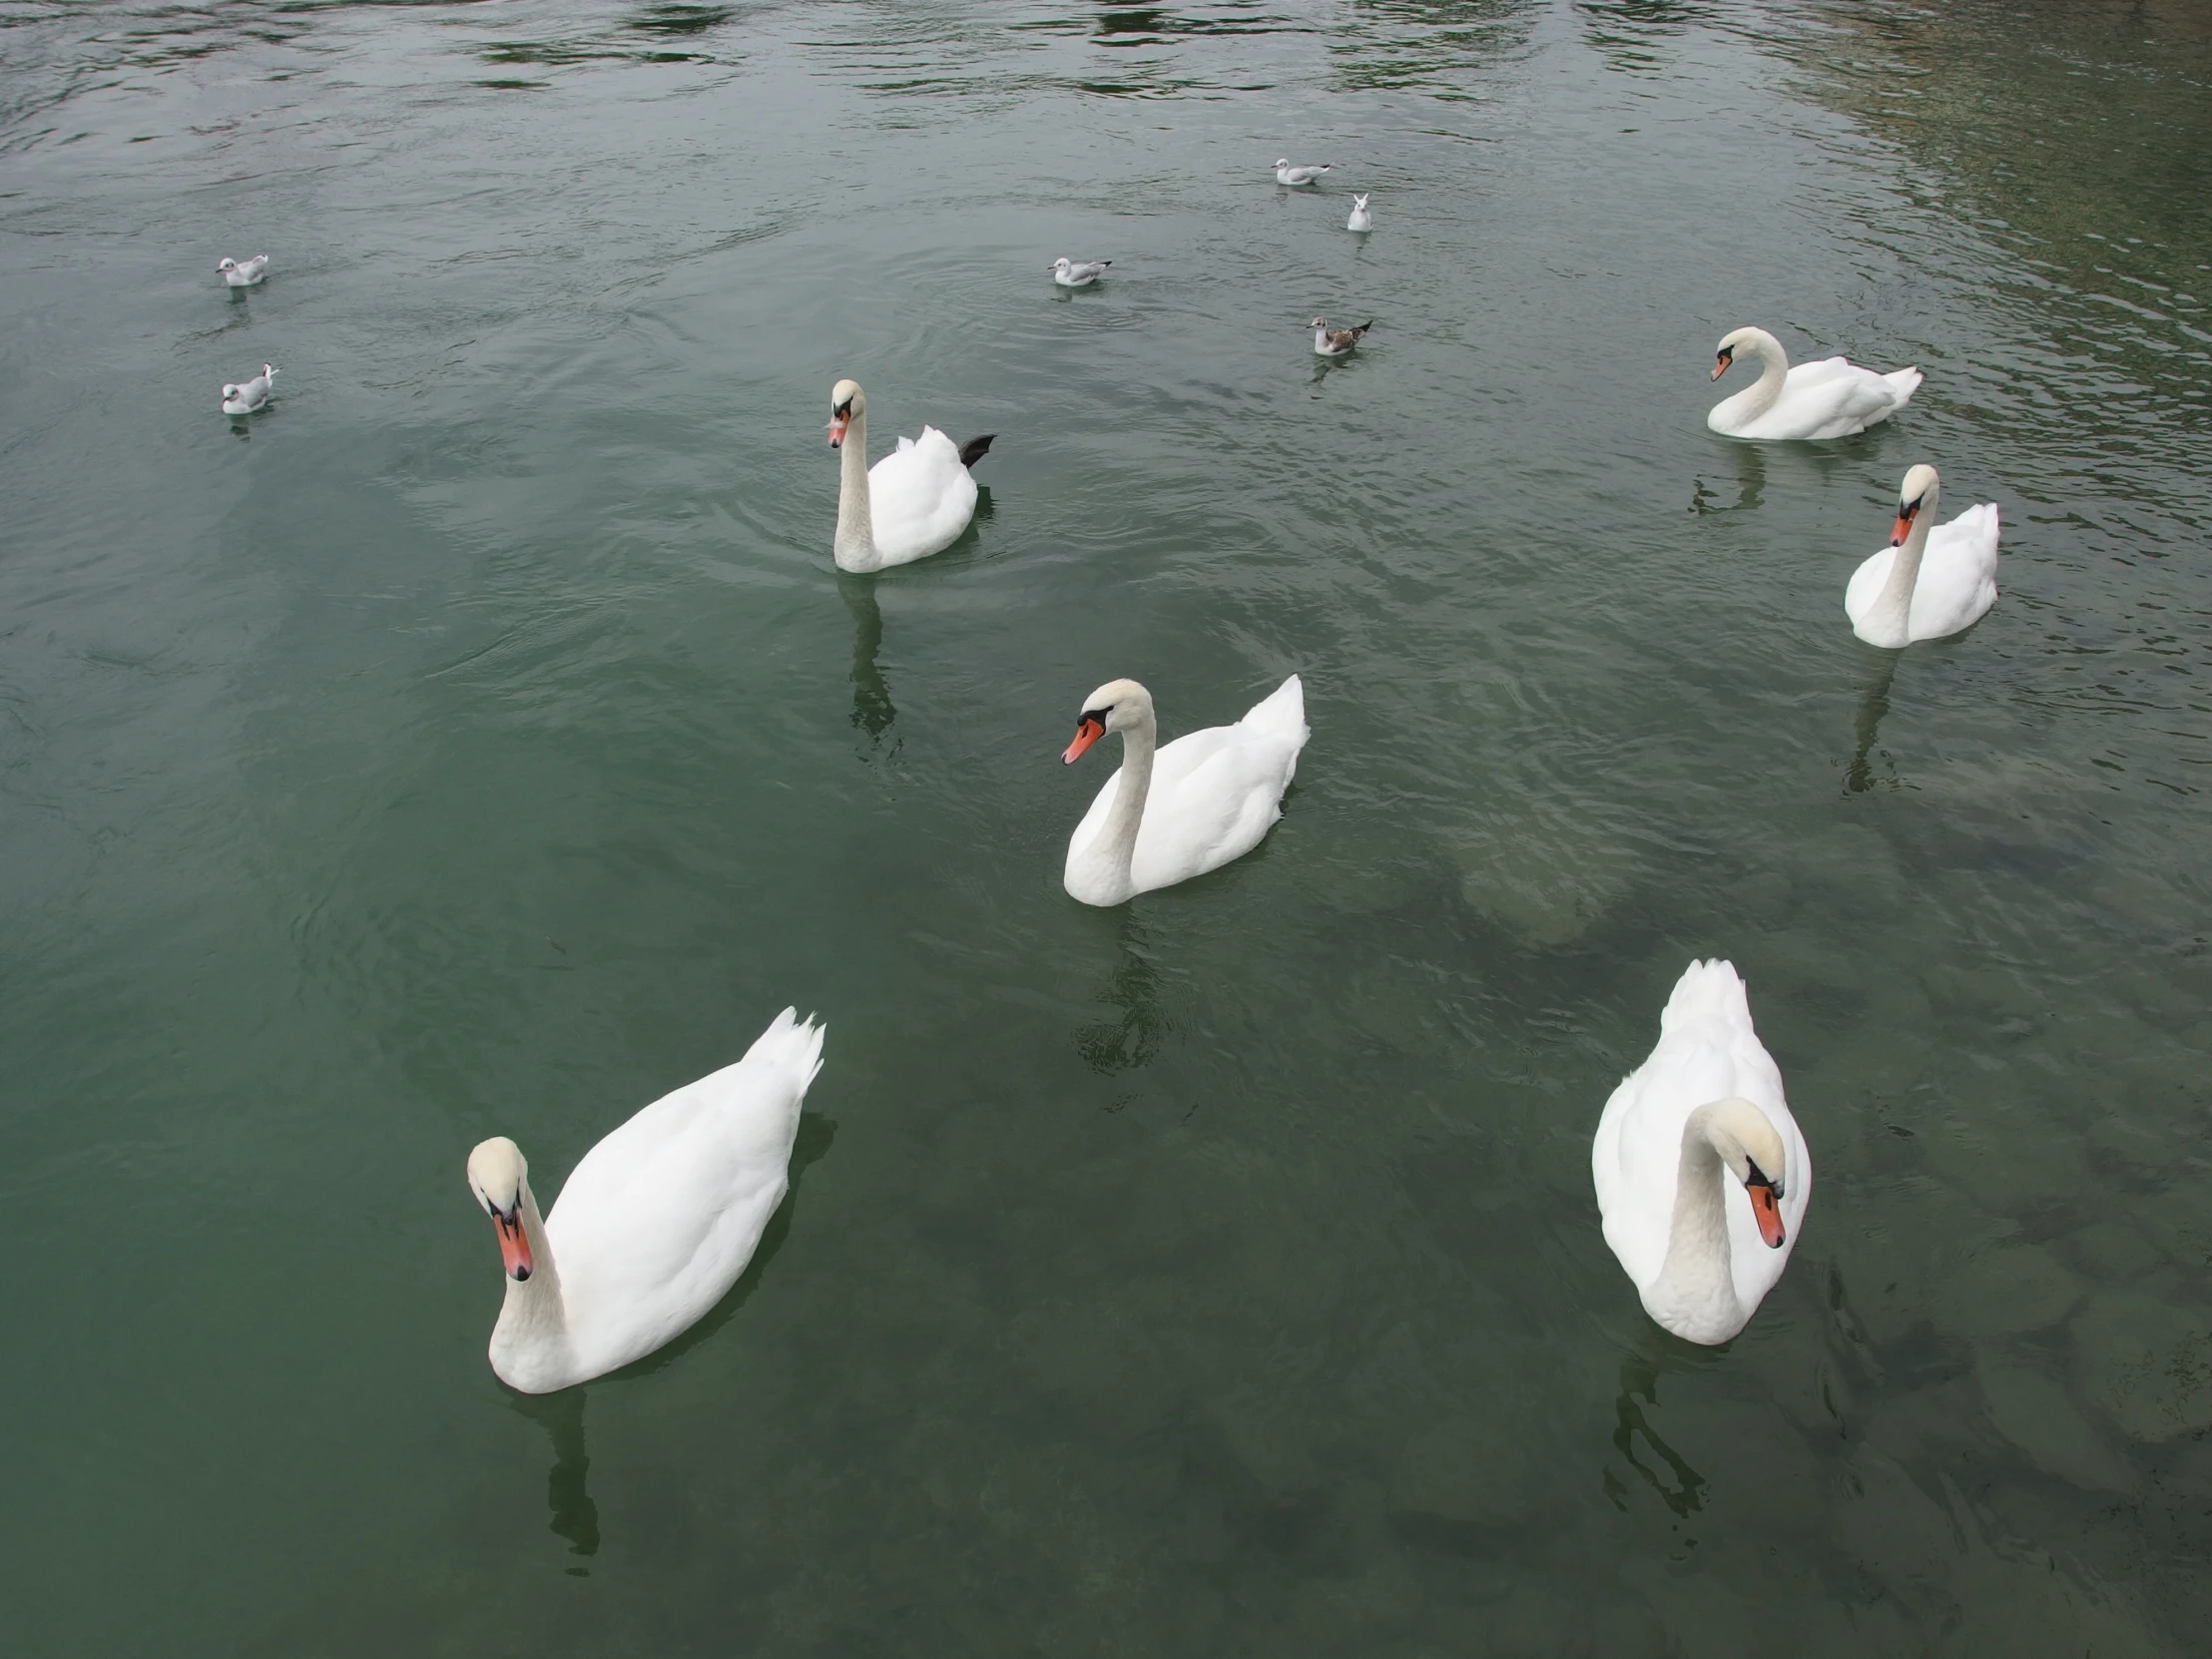 group of white swans in water with a group of seagulls